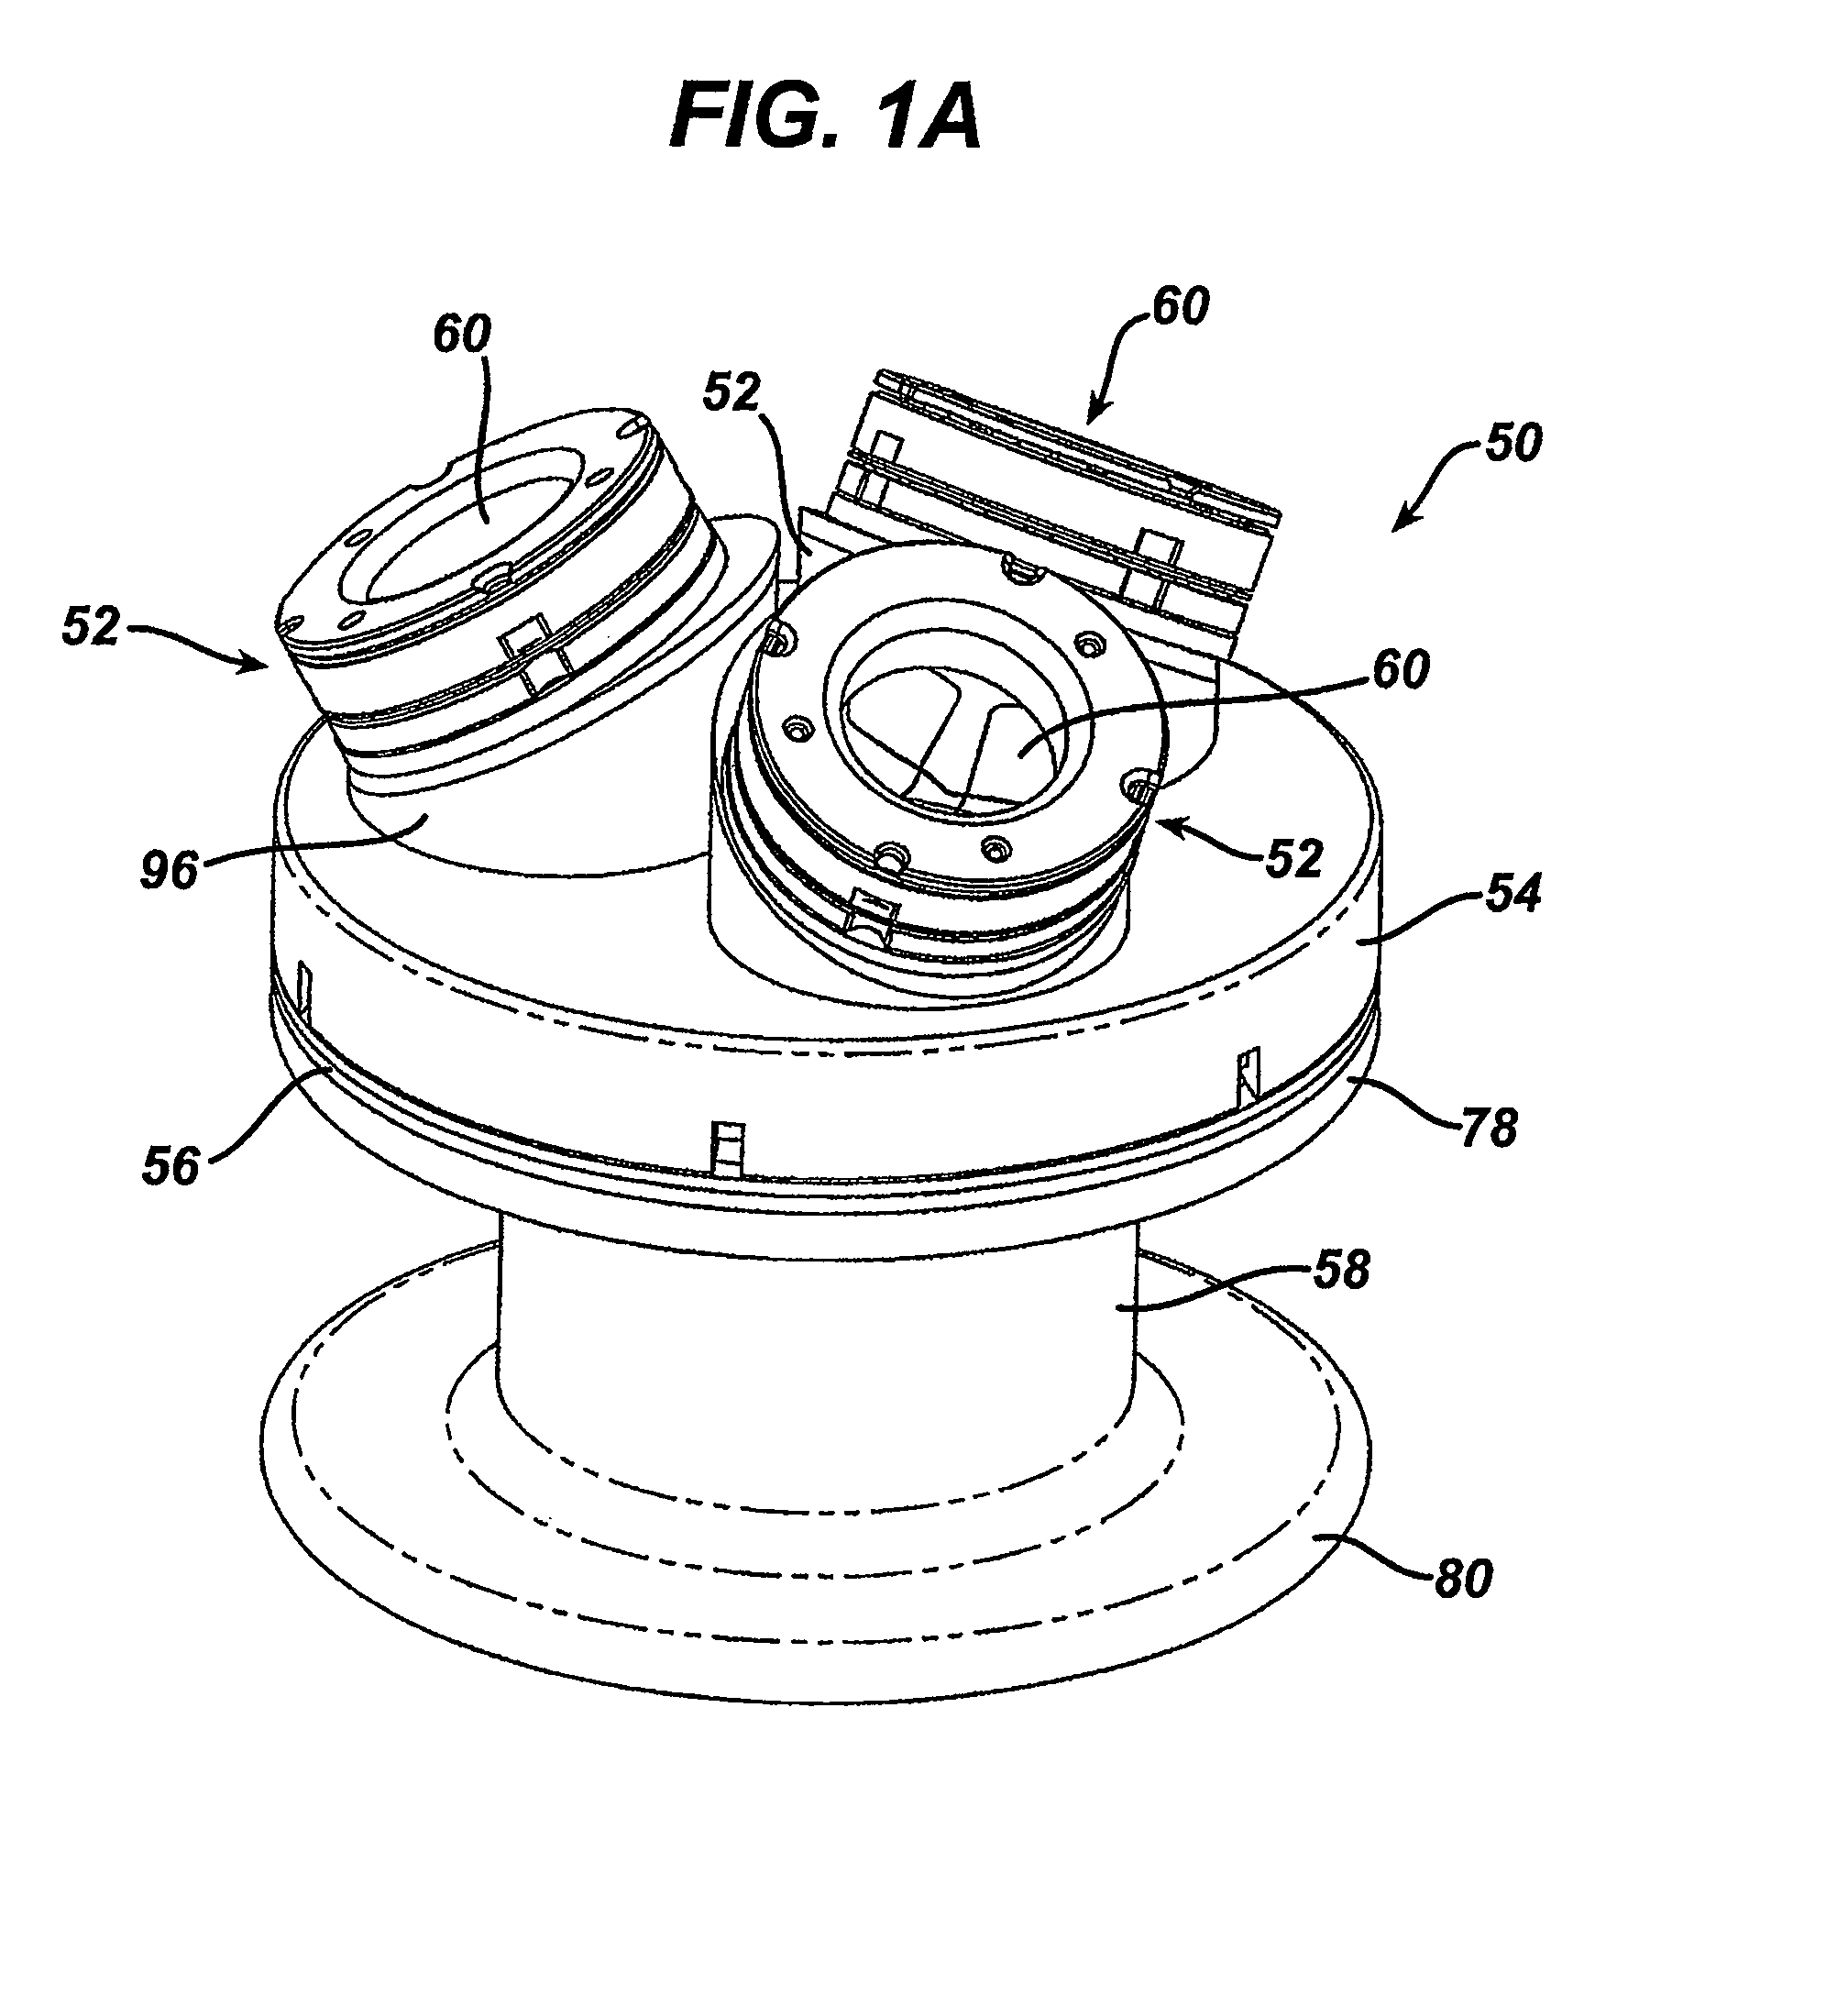 Variable surgical access device